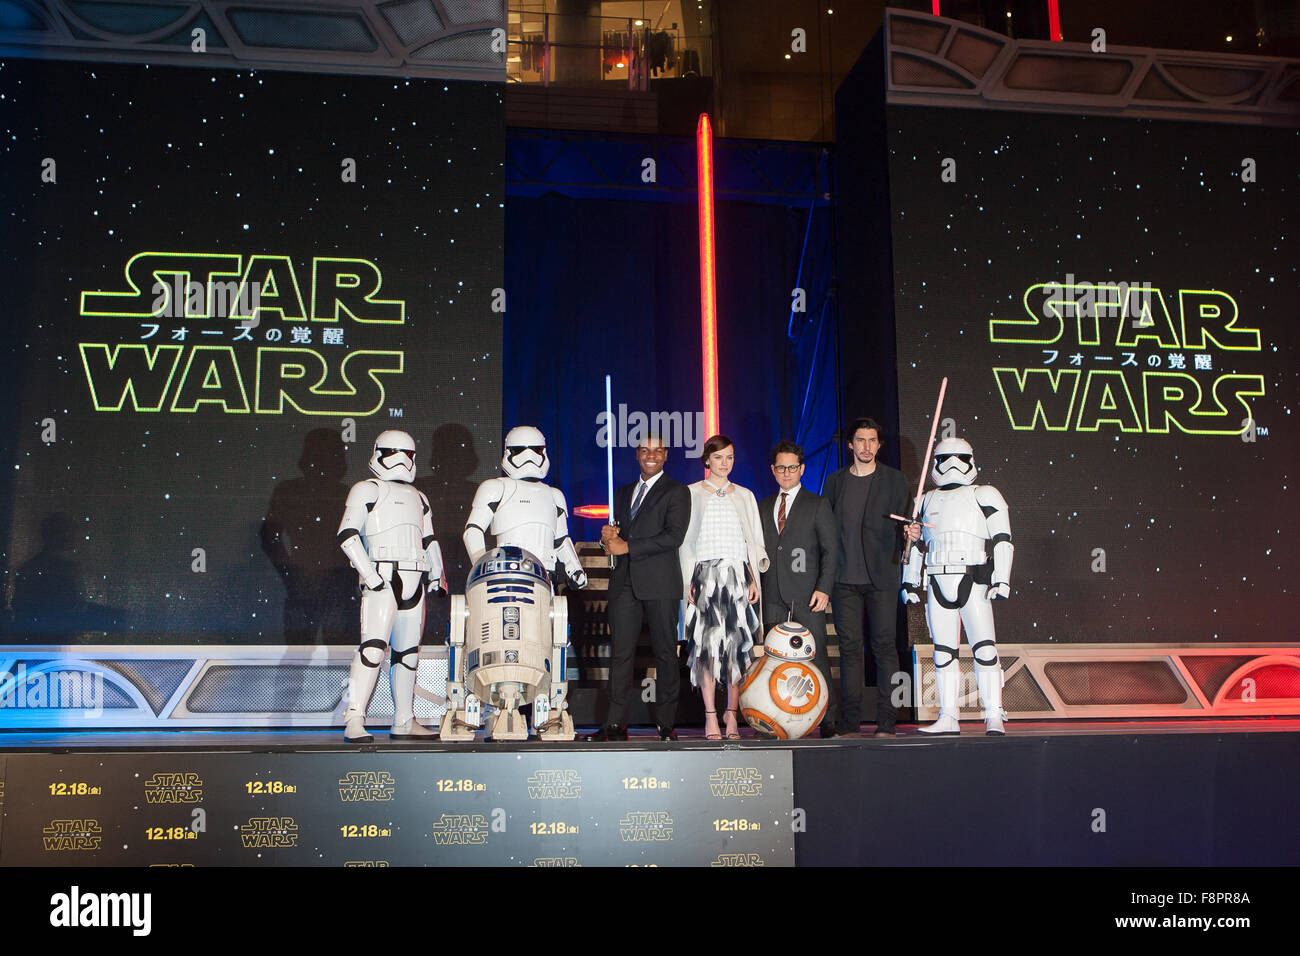 John Boyege, Daisy Ridley, J.J. Abrams and Adam Driver, Dec 10, 2015 : 2015/12/10 Tokyo, John Boyega, Daisy Ridley, R2D2, BB8, Director J.J.Abrams, Adam Driver and Stormtroopers at Star Wars: The Force Awakens Movie Premiere at Roppongi Hills Arena. Michael Steinebach/Aflo Stock Photo